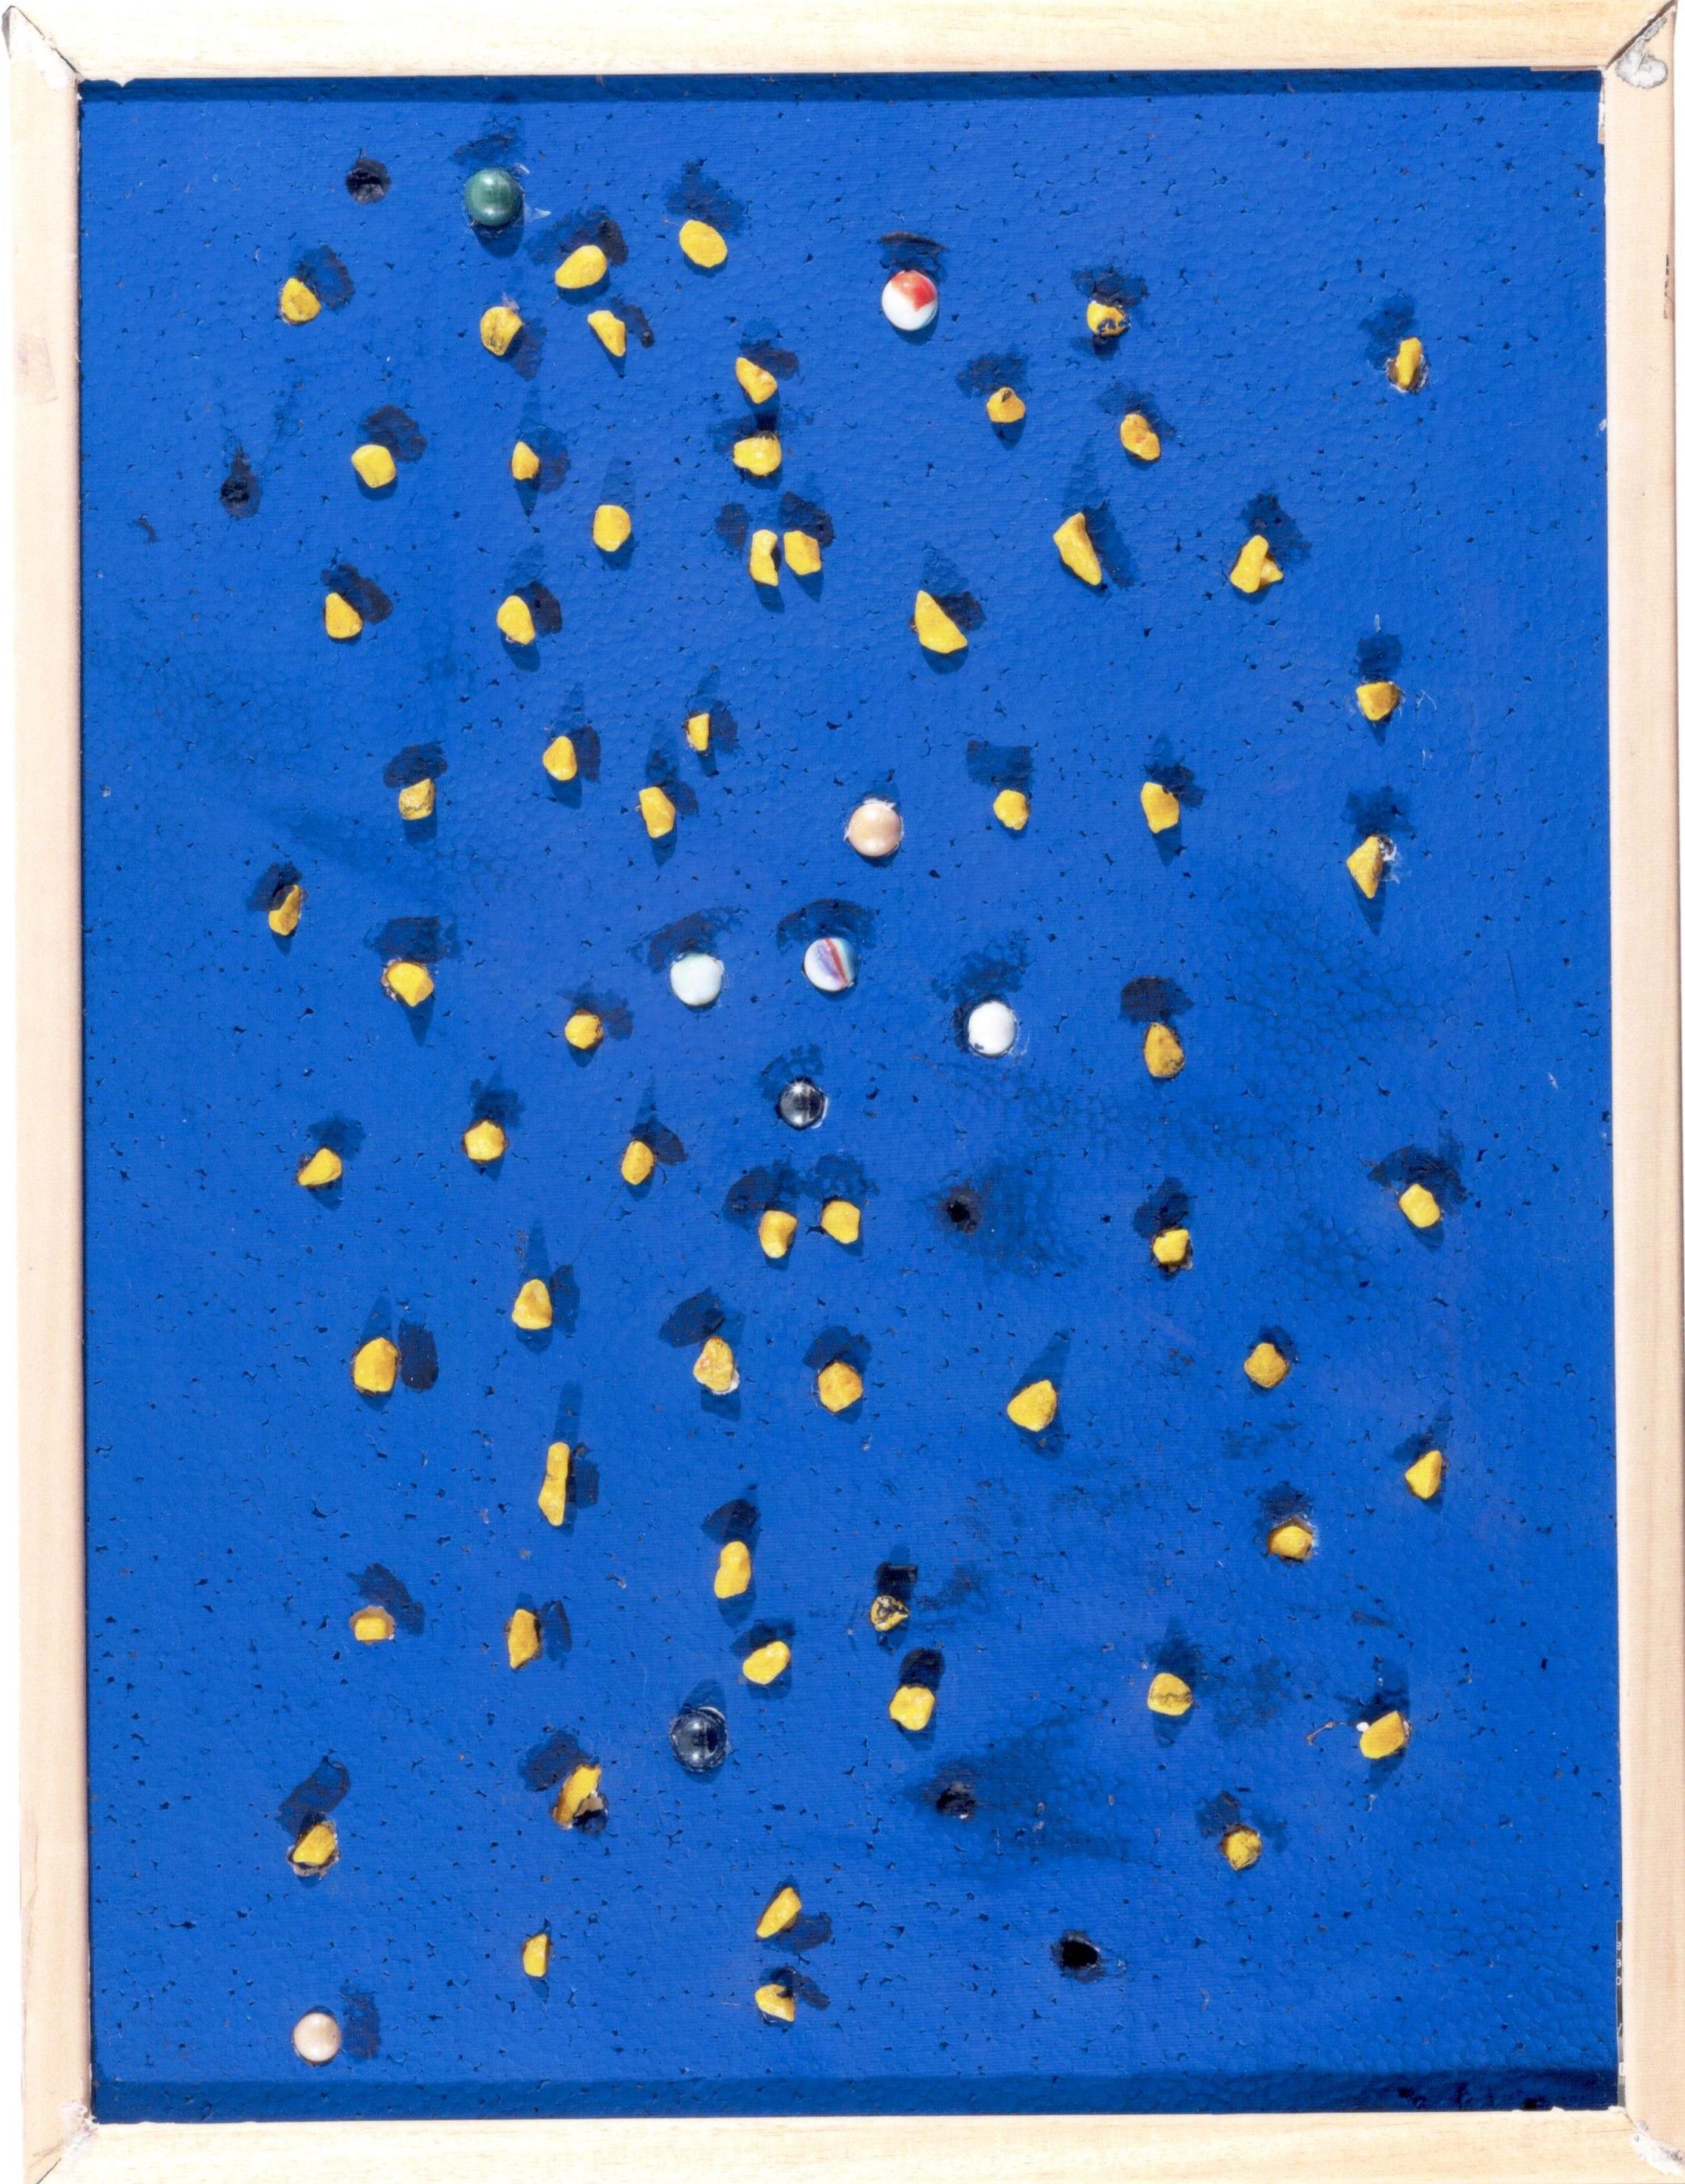 Stones on Blue is an original artwork realized in 2014 by the Italian contemporary artist Mario Biagetti. 

Acrylic painting on polyestere; plastic materials.

Wood minimal frame is included. 

Perfect conditions. 

Stones on Blue is a minimal